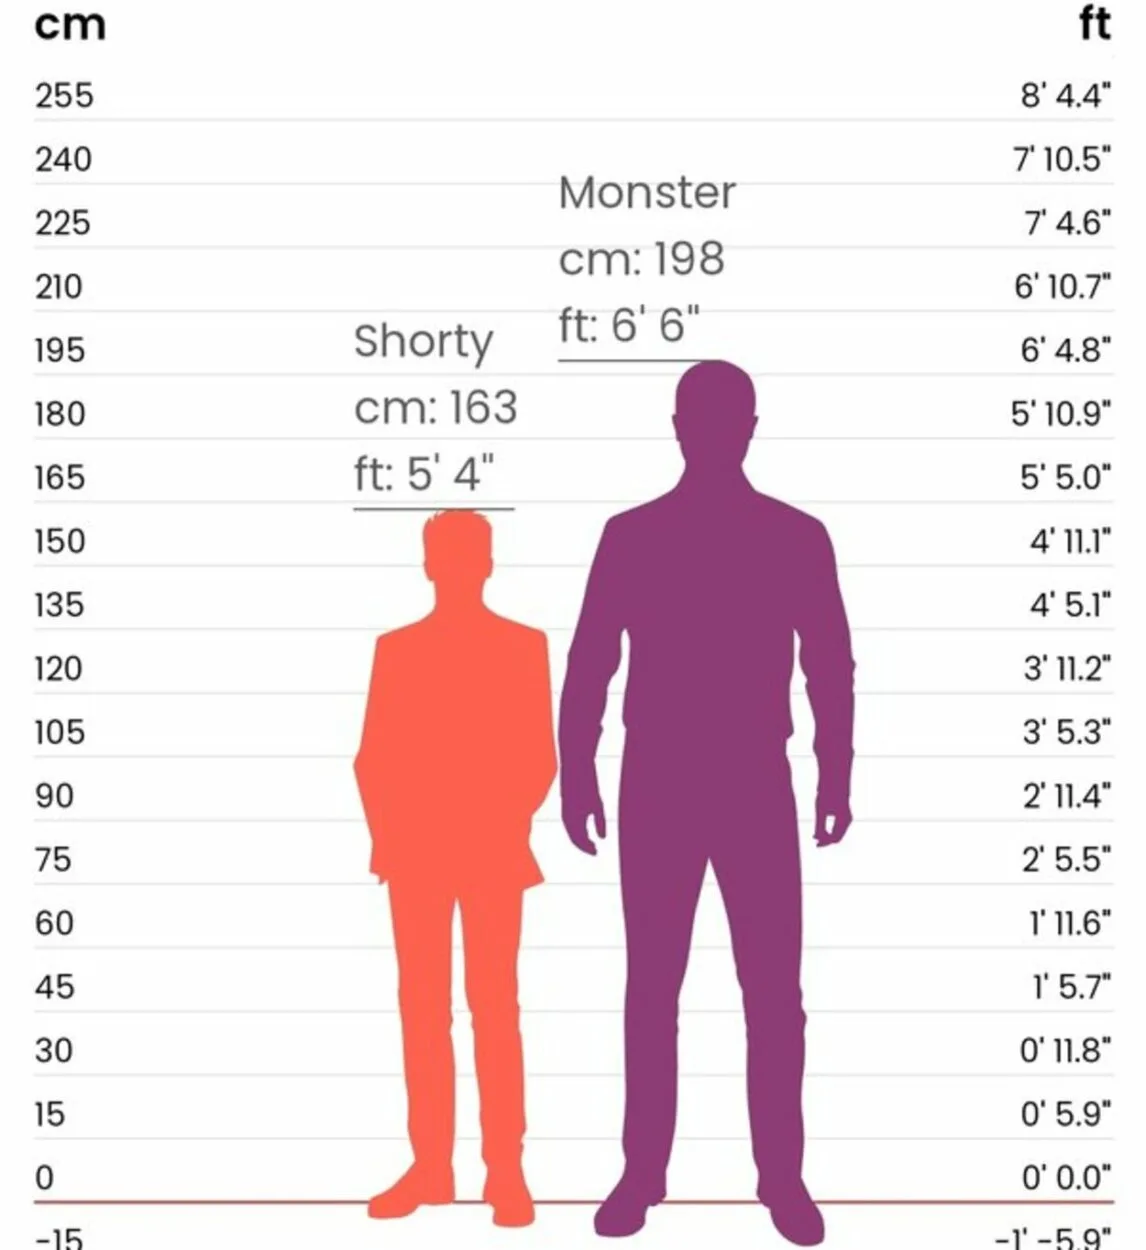 A height comparison chart